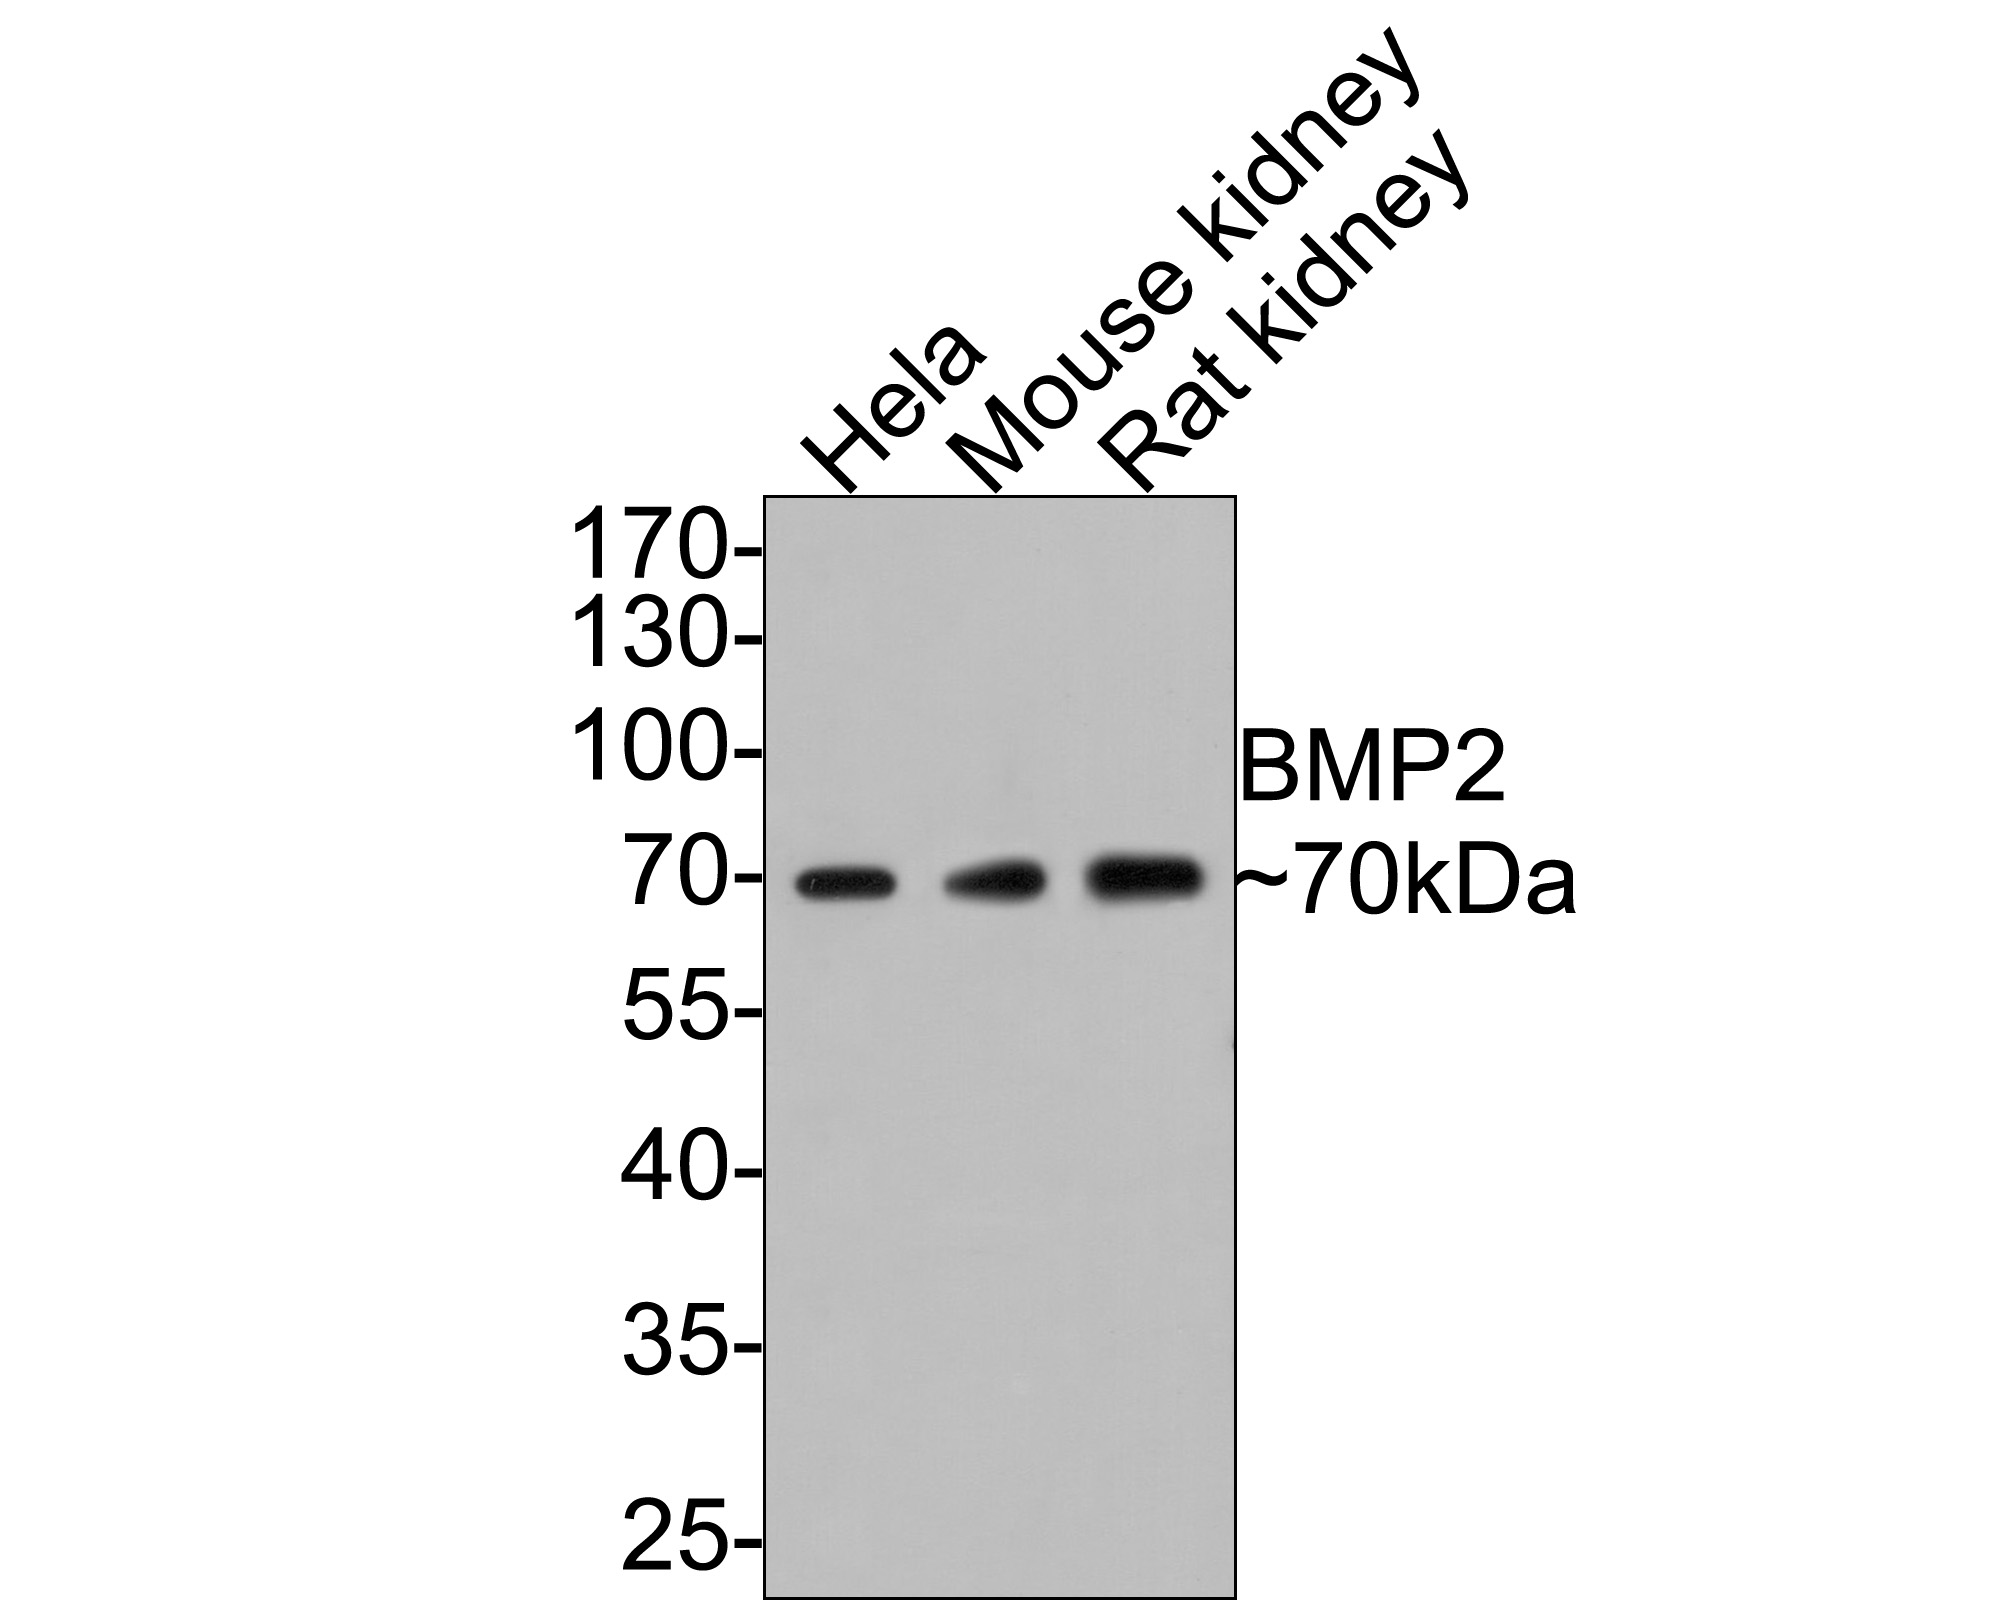 Western blot analysis of BMP2 on different lysates using anti-BMP2 antibody at 1/1,000 dilution.<br />
Positive control:<br />
Lane 1: Rat kidney<br />
Lane 2: Mouse kidney<br />
Lane 3: Human kidney<br />
Lane 4: Hela